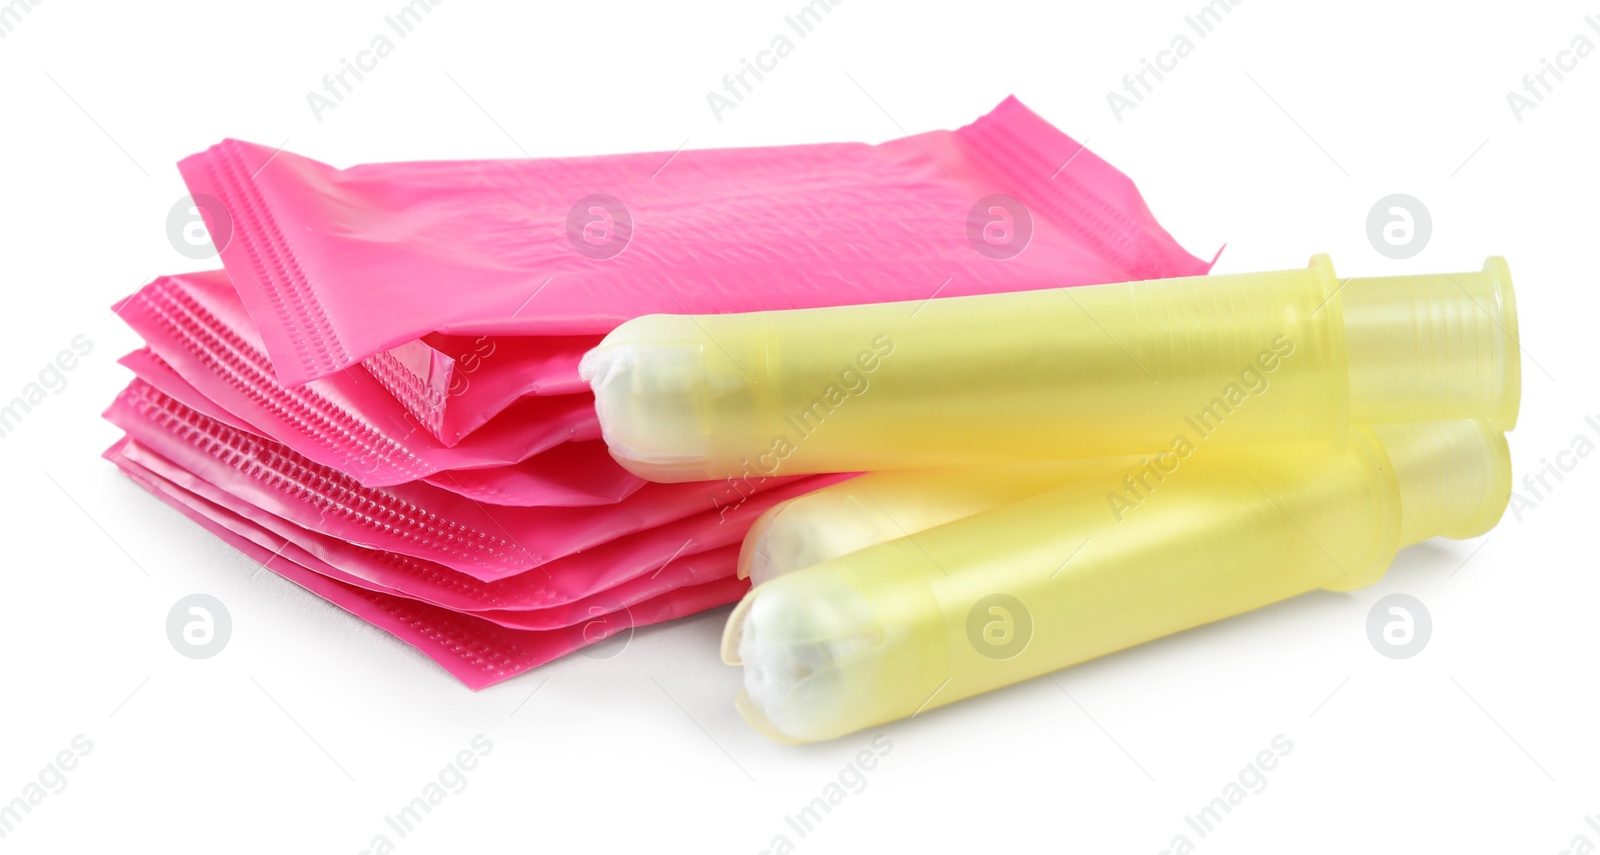 Photo of Pads and tampons on white background. Menstrual hygiene product